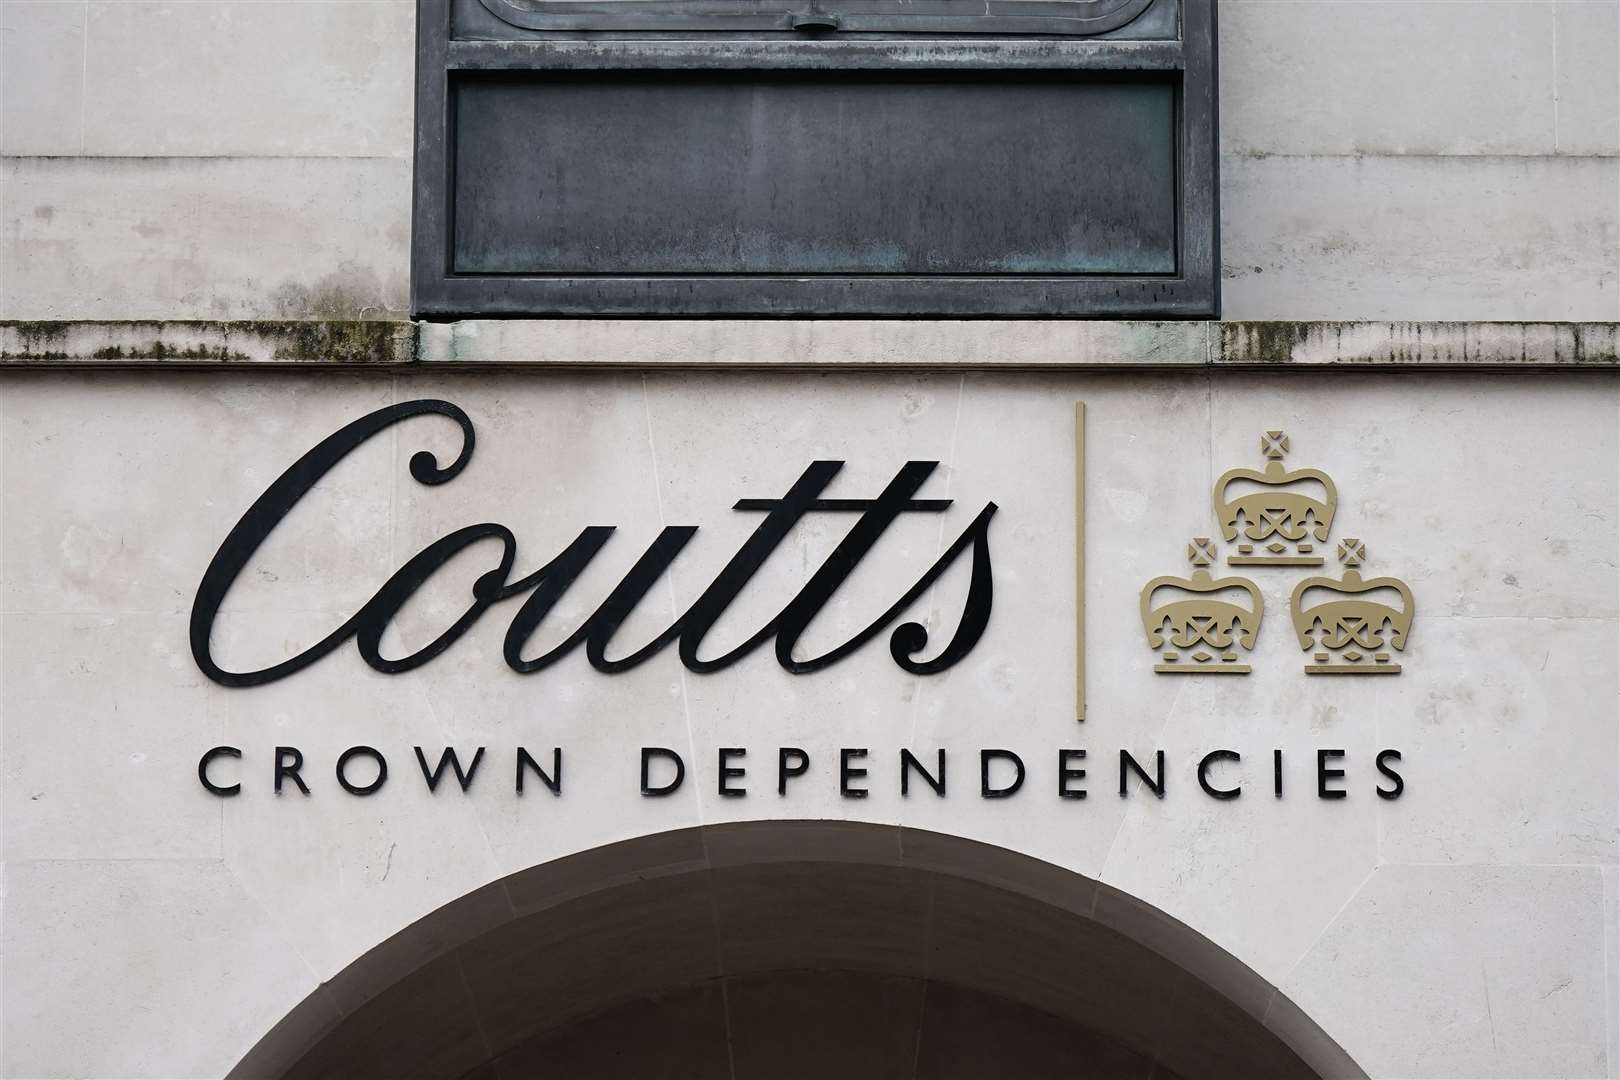 High-net-worth bank Coutts, owned by NatWest Group, will face a probe into how it handled the Nigel Farage account closure (Aaron Chown/PA)